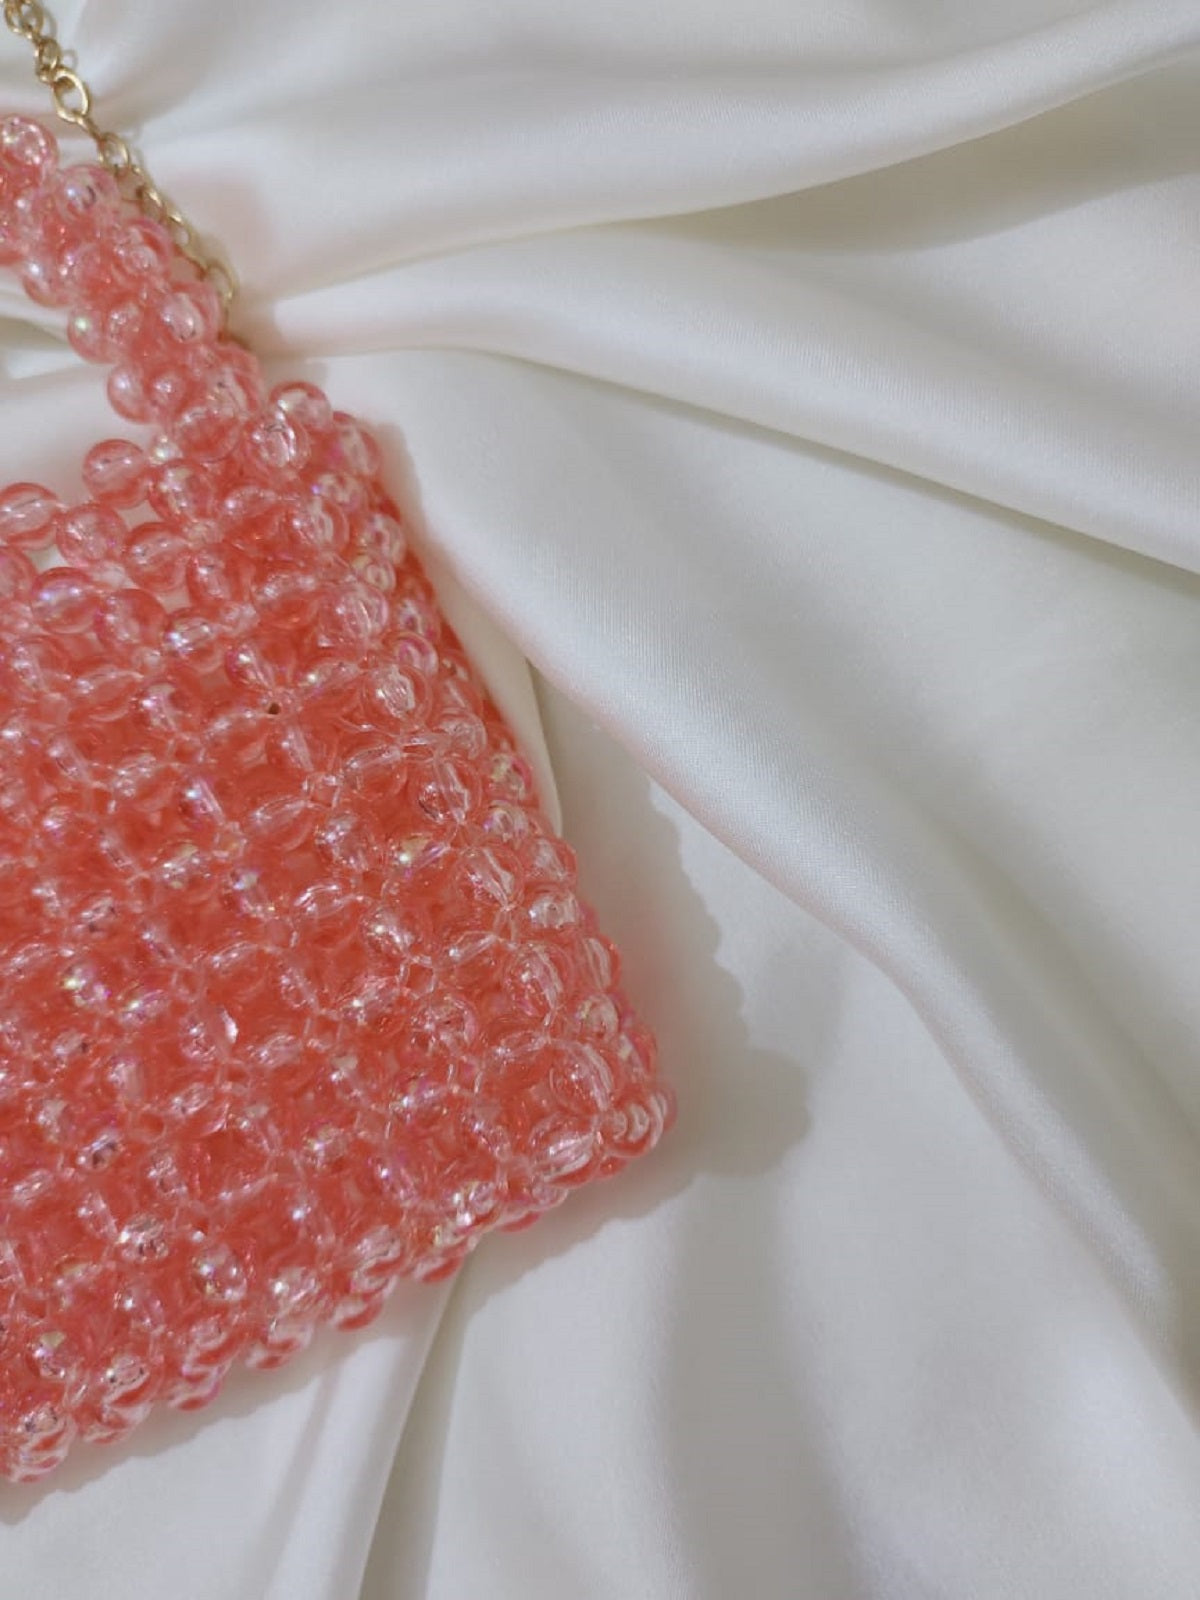 Detail shot of the mini beaded strap, crafted with matching baby pink beads, harmonizing perfectly with the bag's exterior